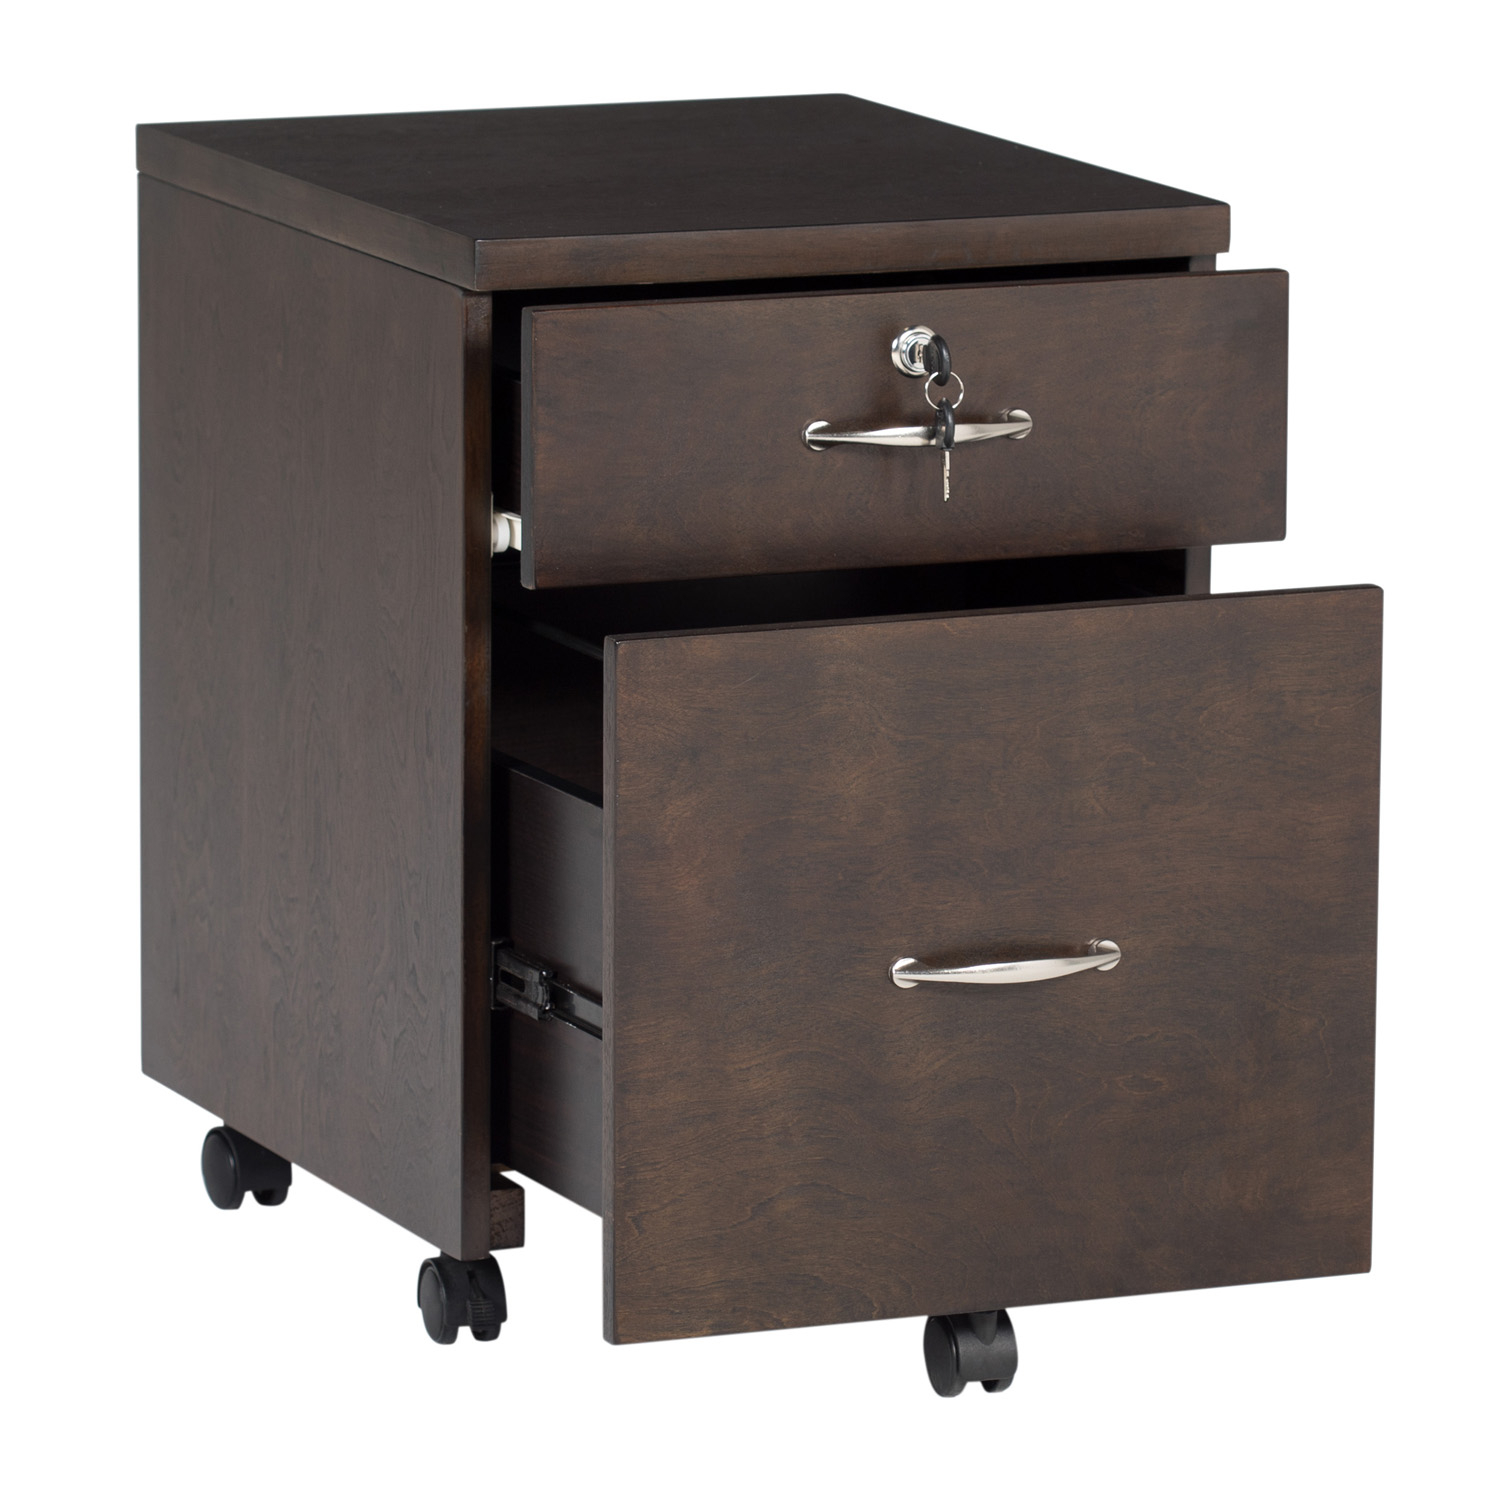 Wooden File Cabinet With Lock • Cabinet Ideas